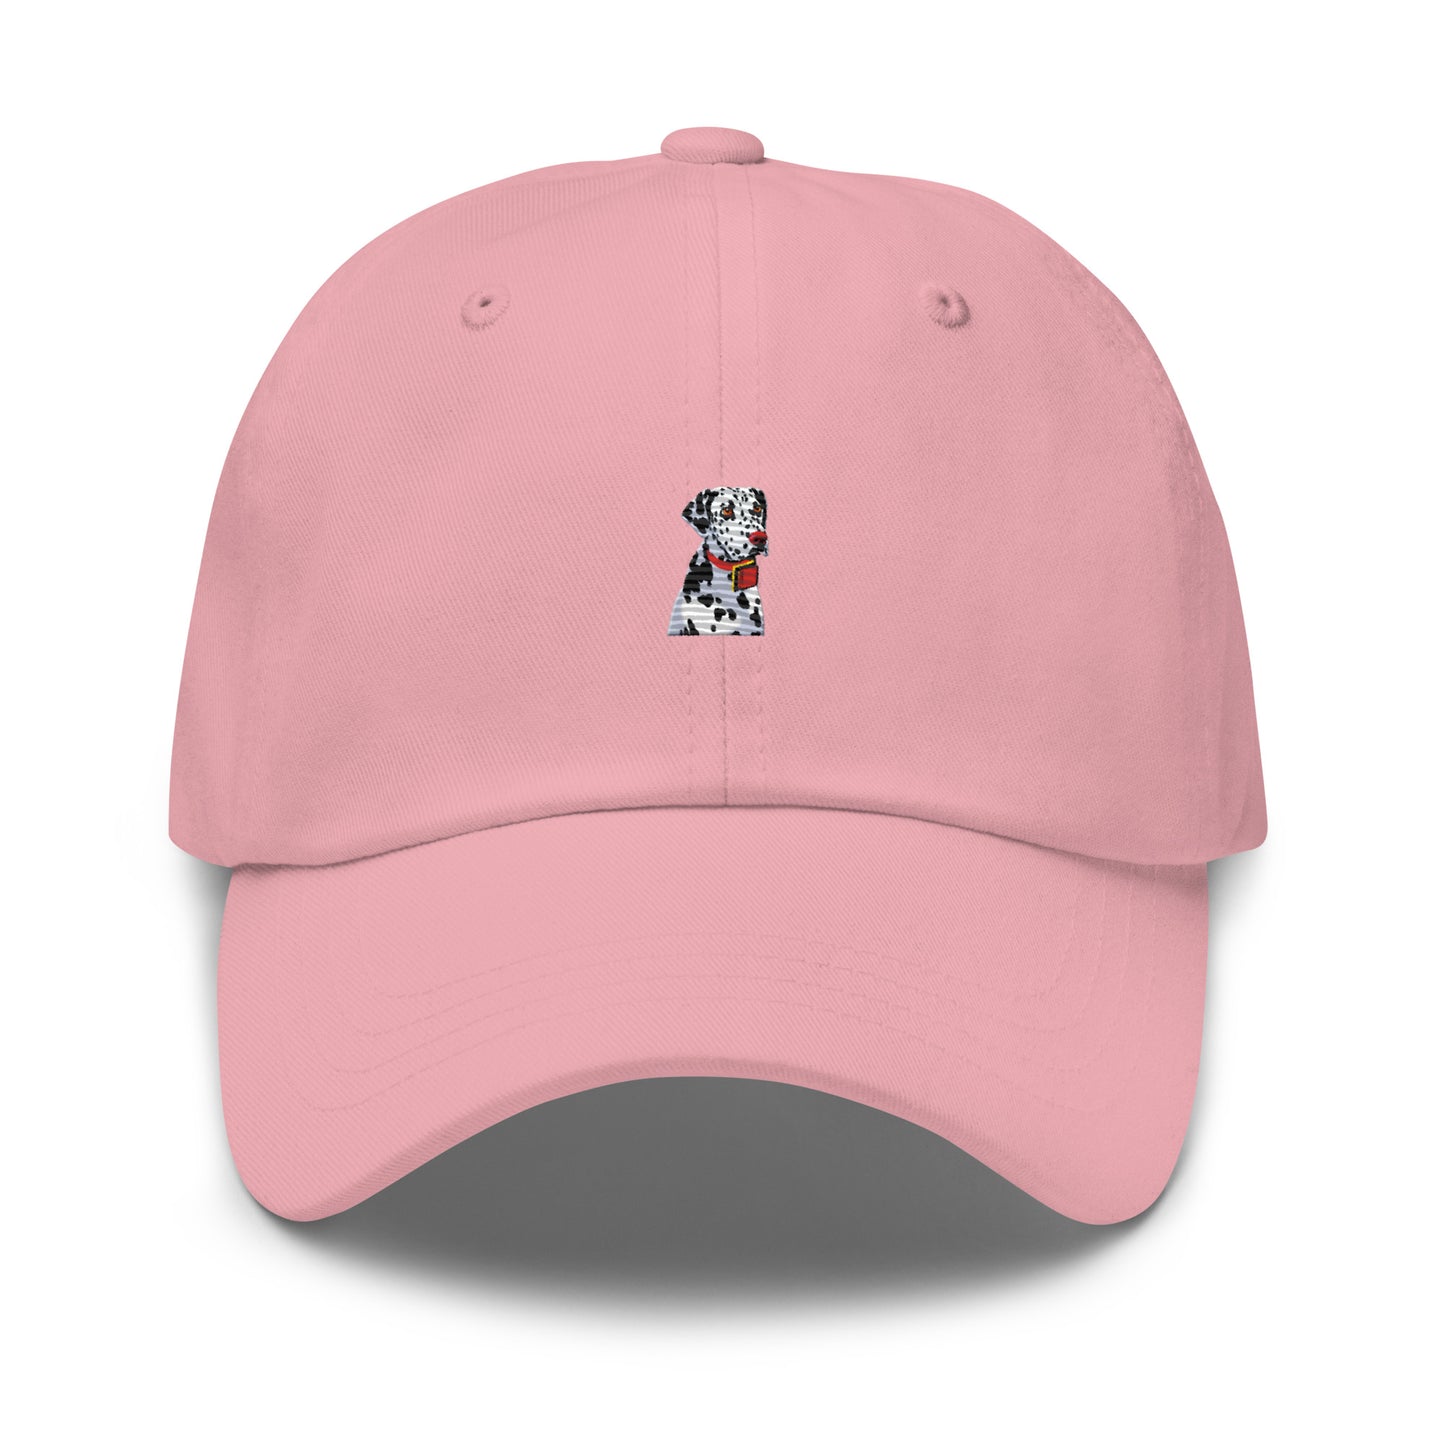 Dalmatian Embroidered Hat